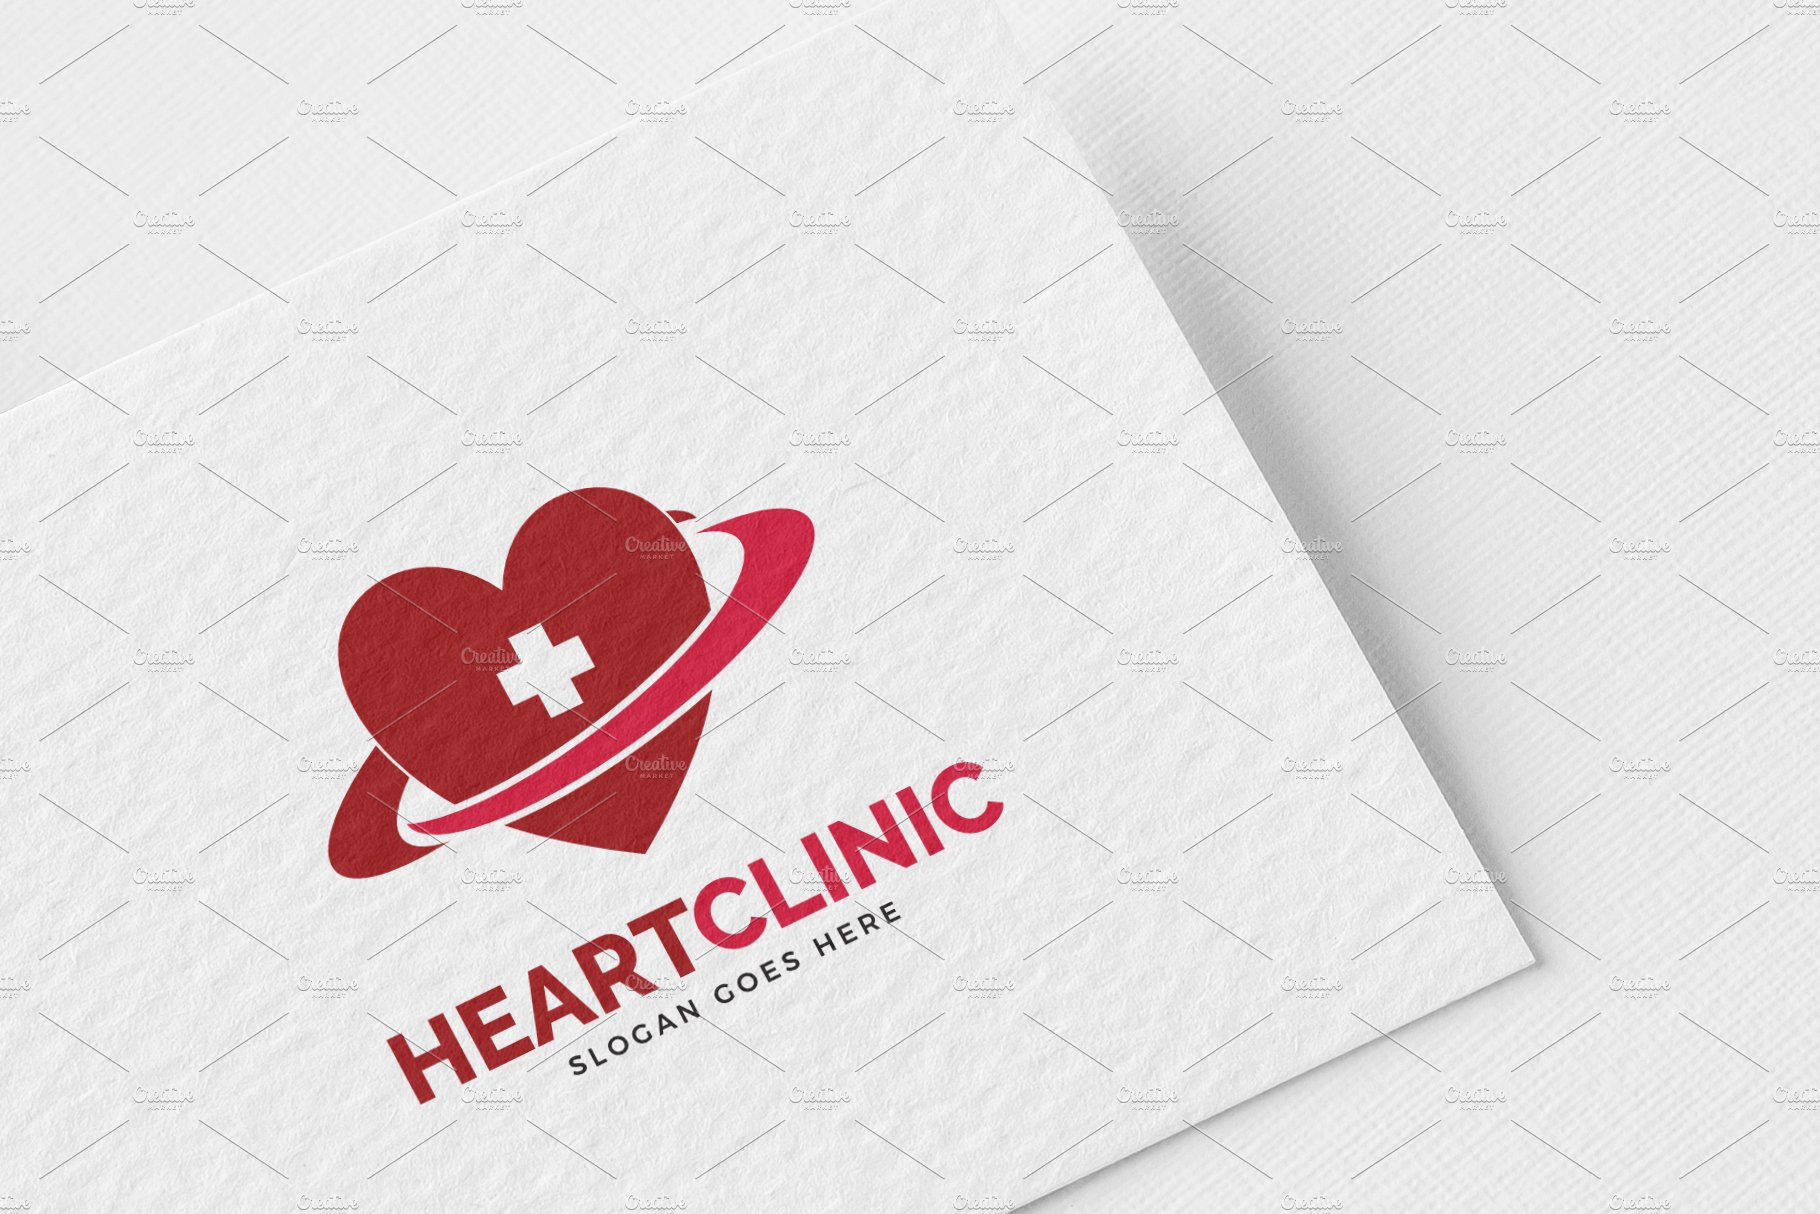 Heart Clinic Logo Template cover image.